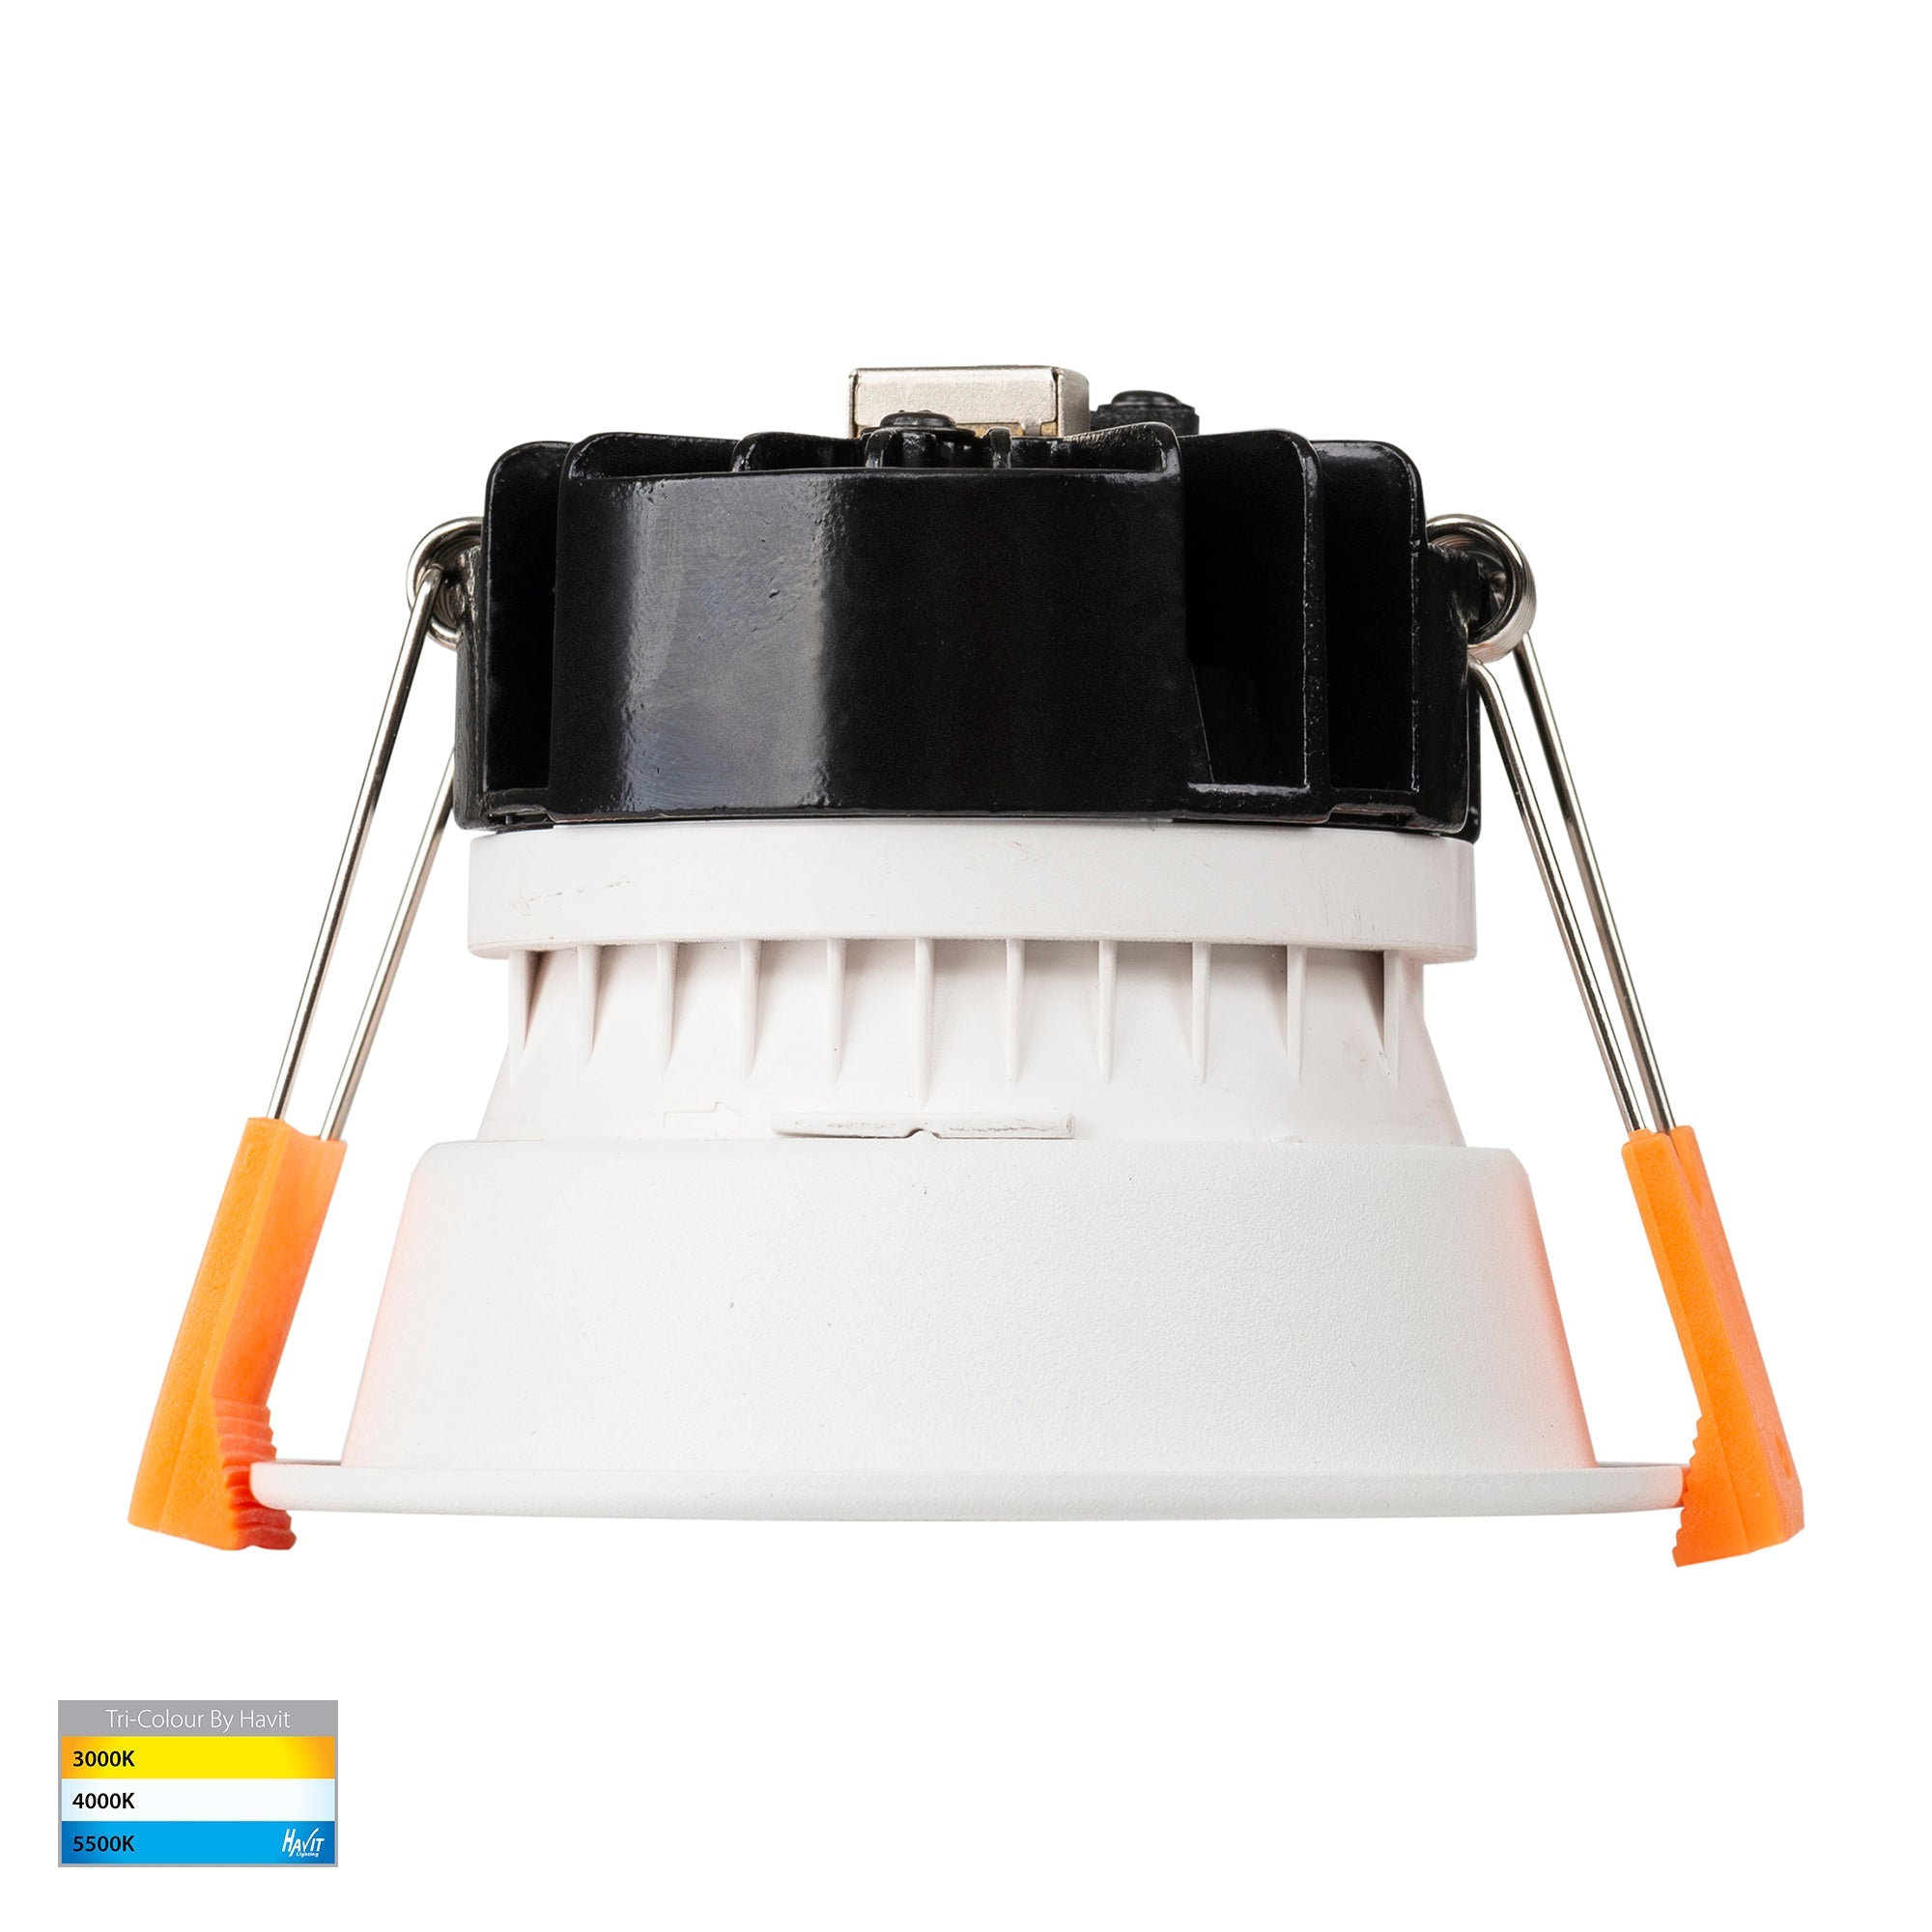 HV5529T-WC - Gleam White with Chrome Insert Tri Colour Fixed Deep LED Downlight